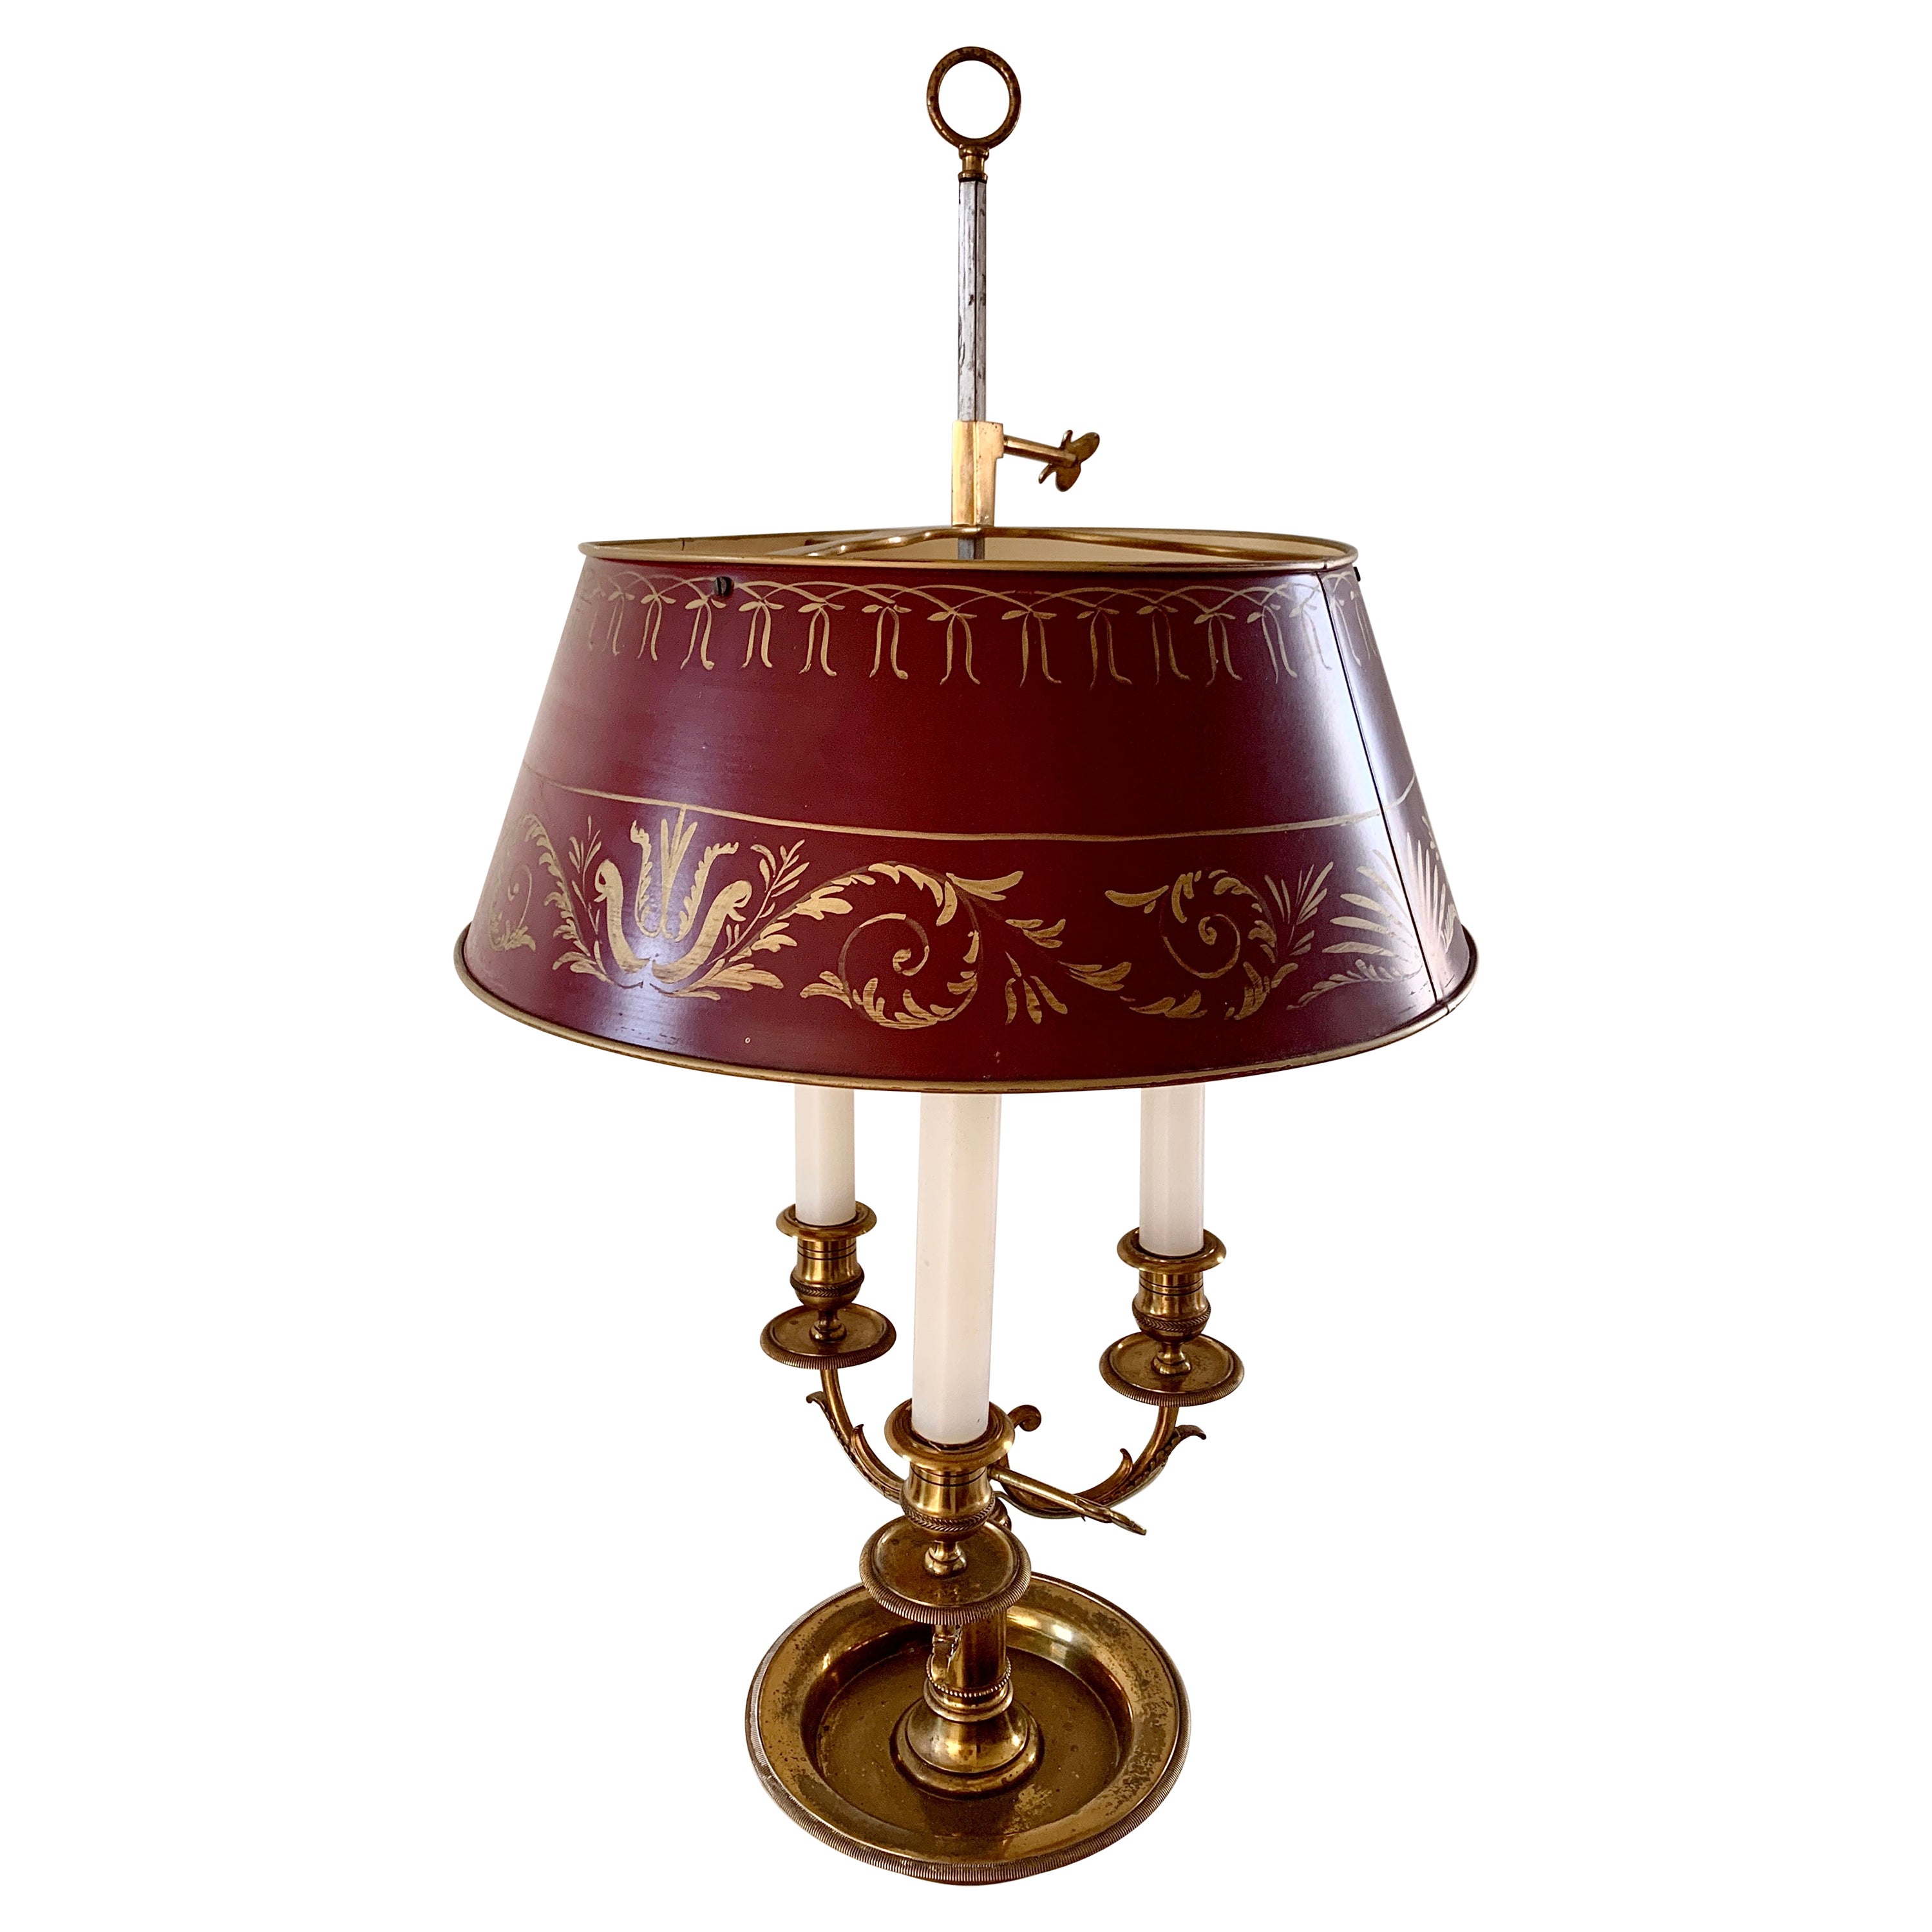 Mid-20th Century Brass Three-Arm Bouillotte Lamp With Red Tole Shade